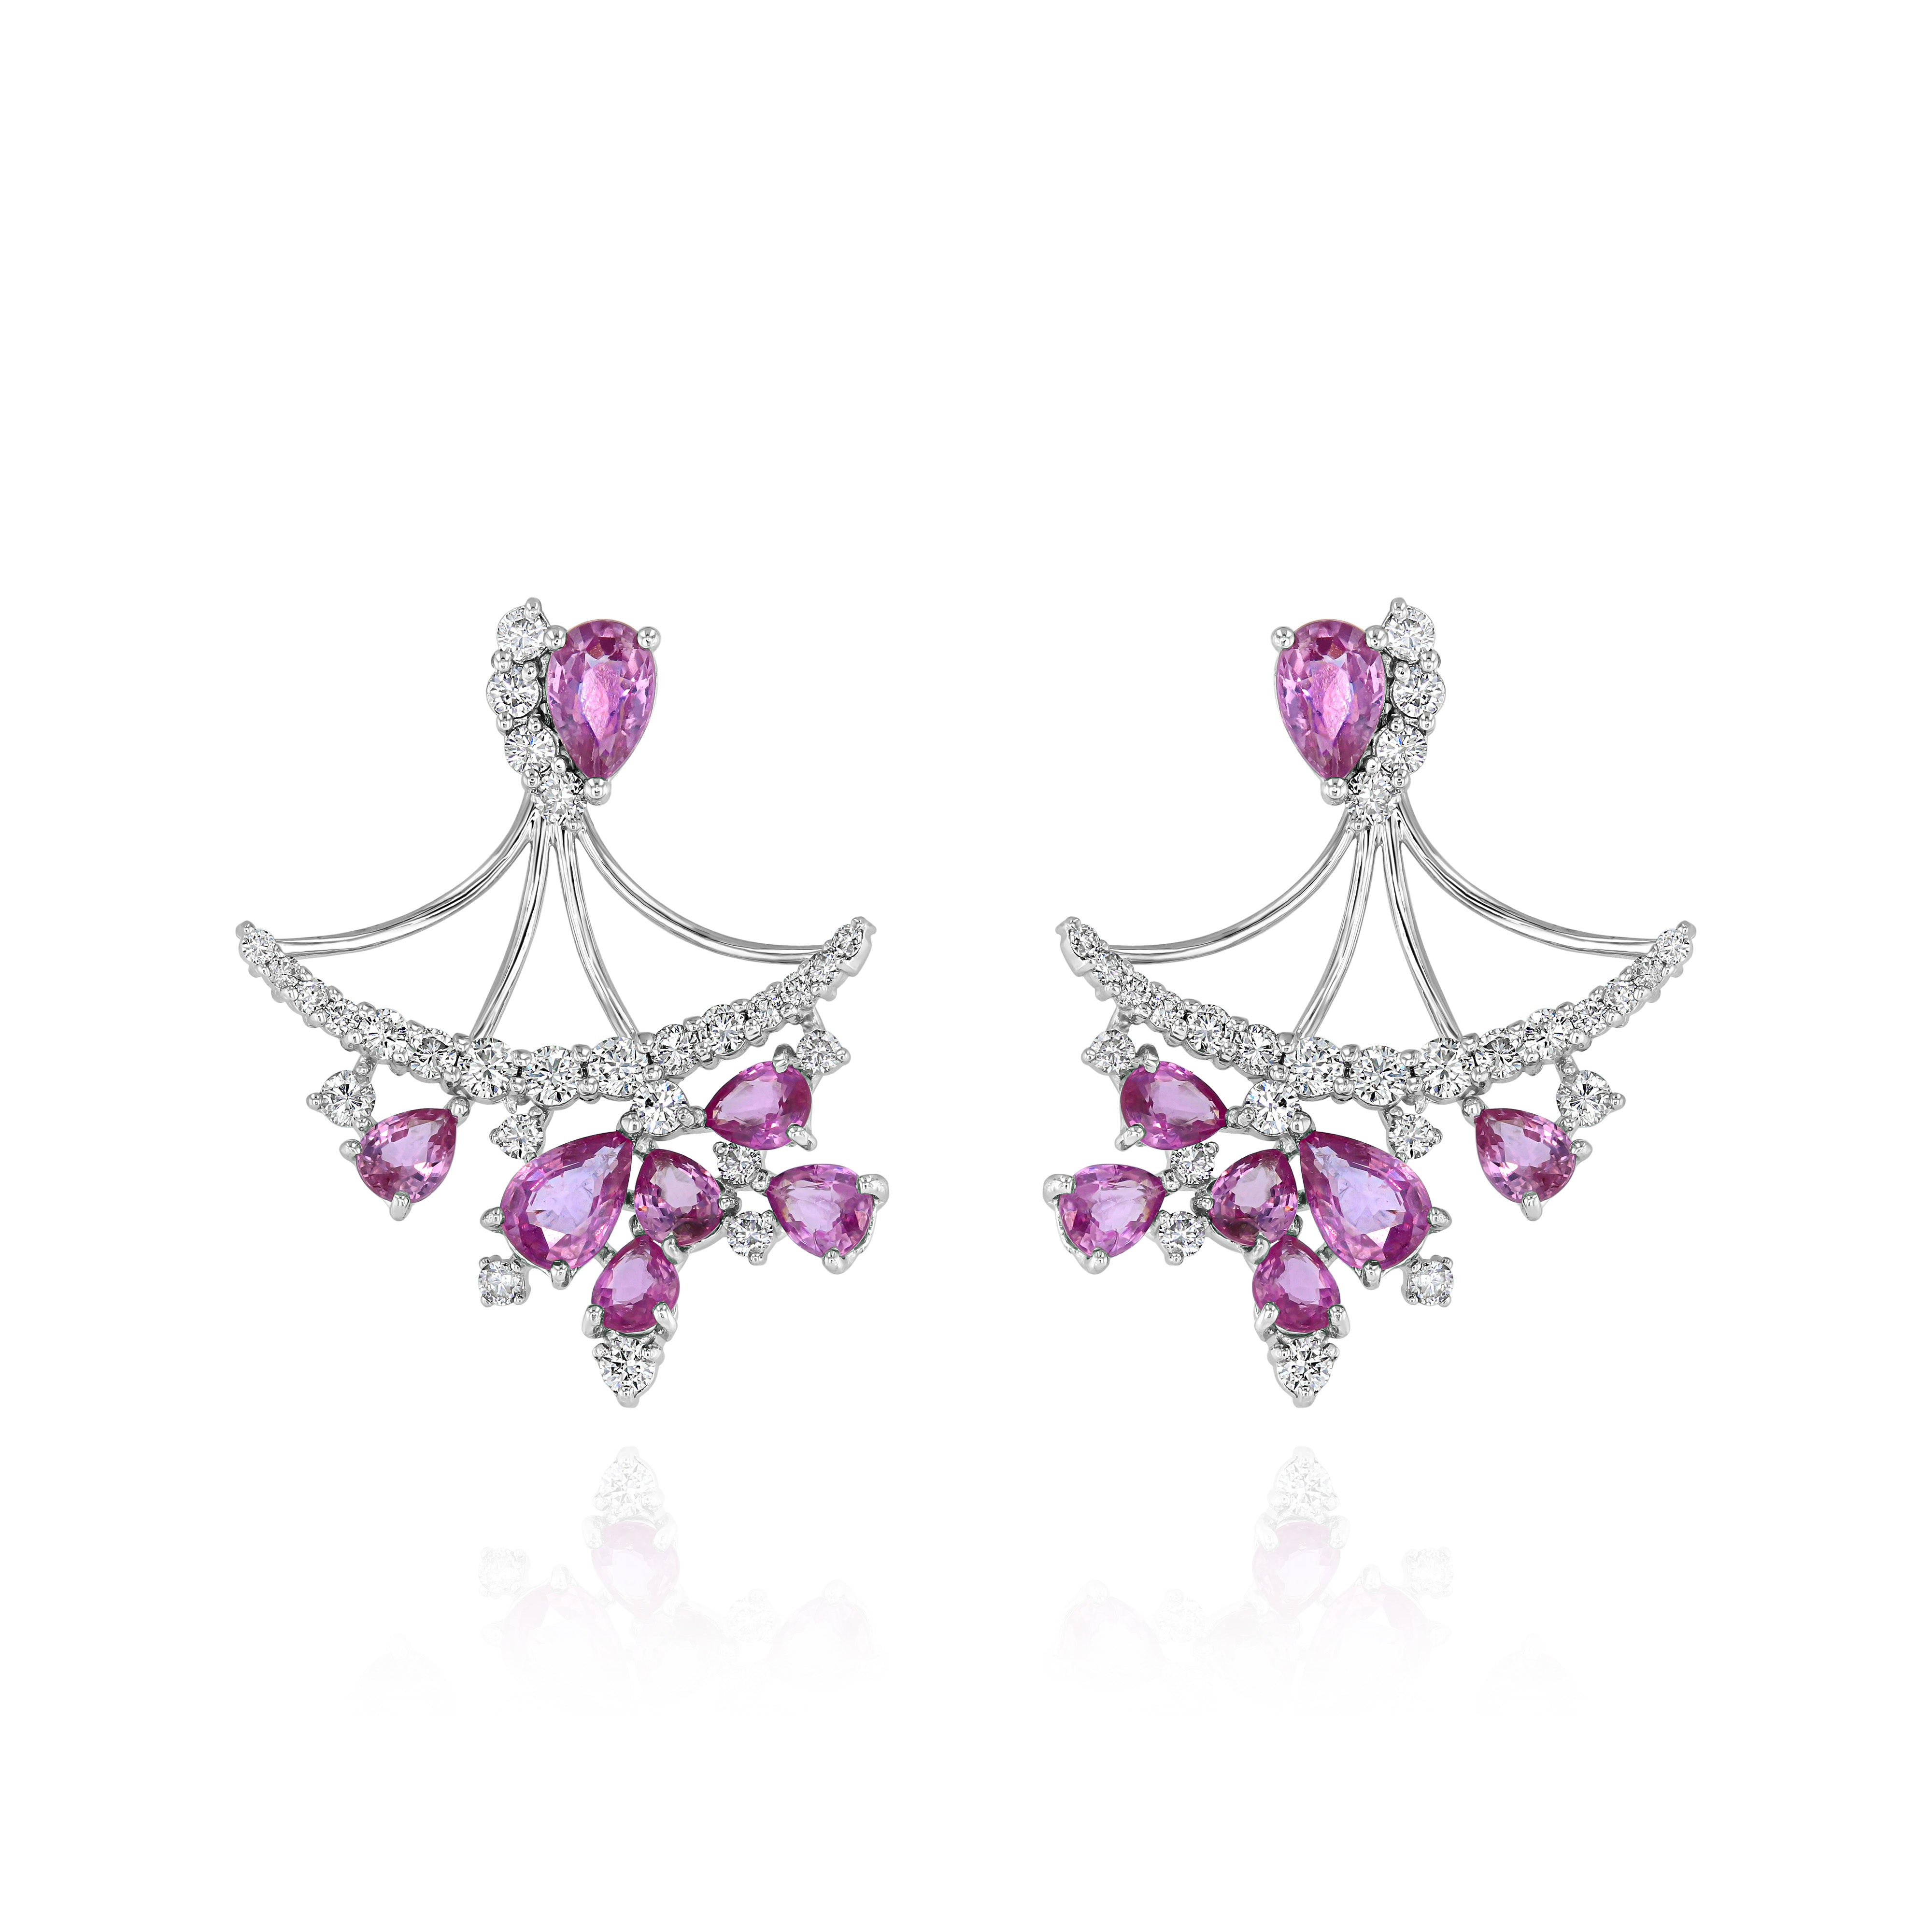 White Gold Earrings with Pink Sapphires and Diamonds, Large